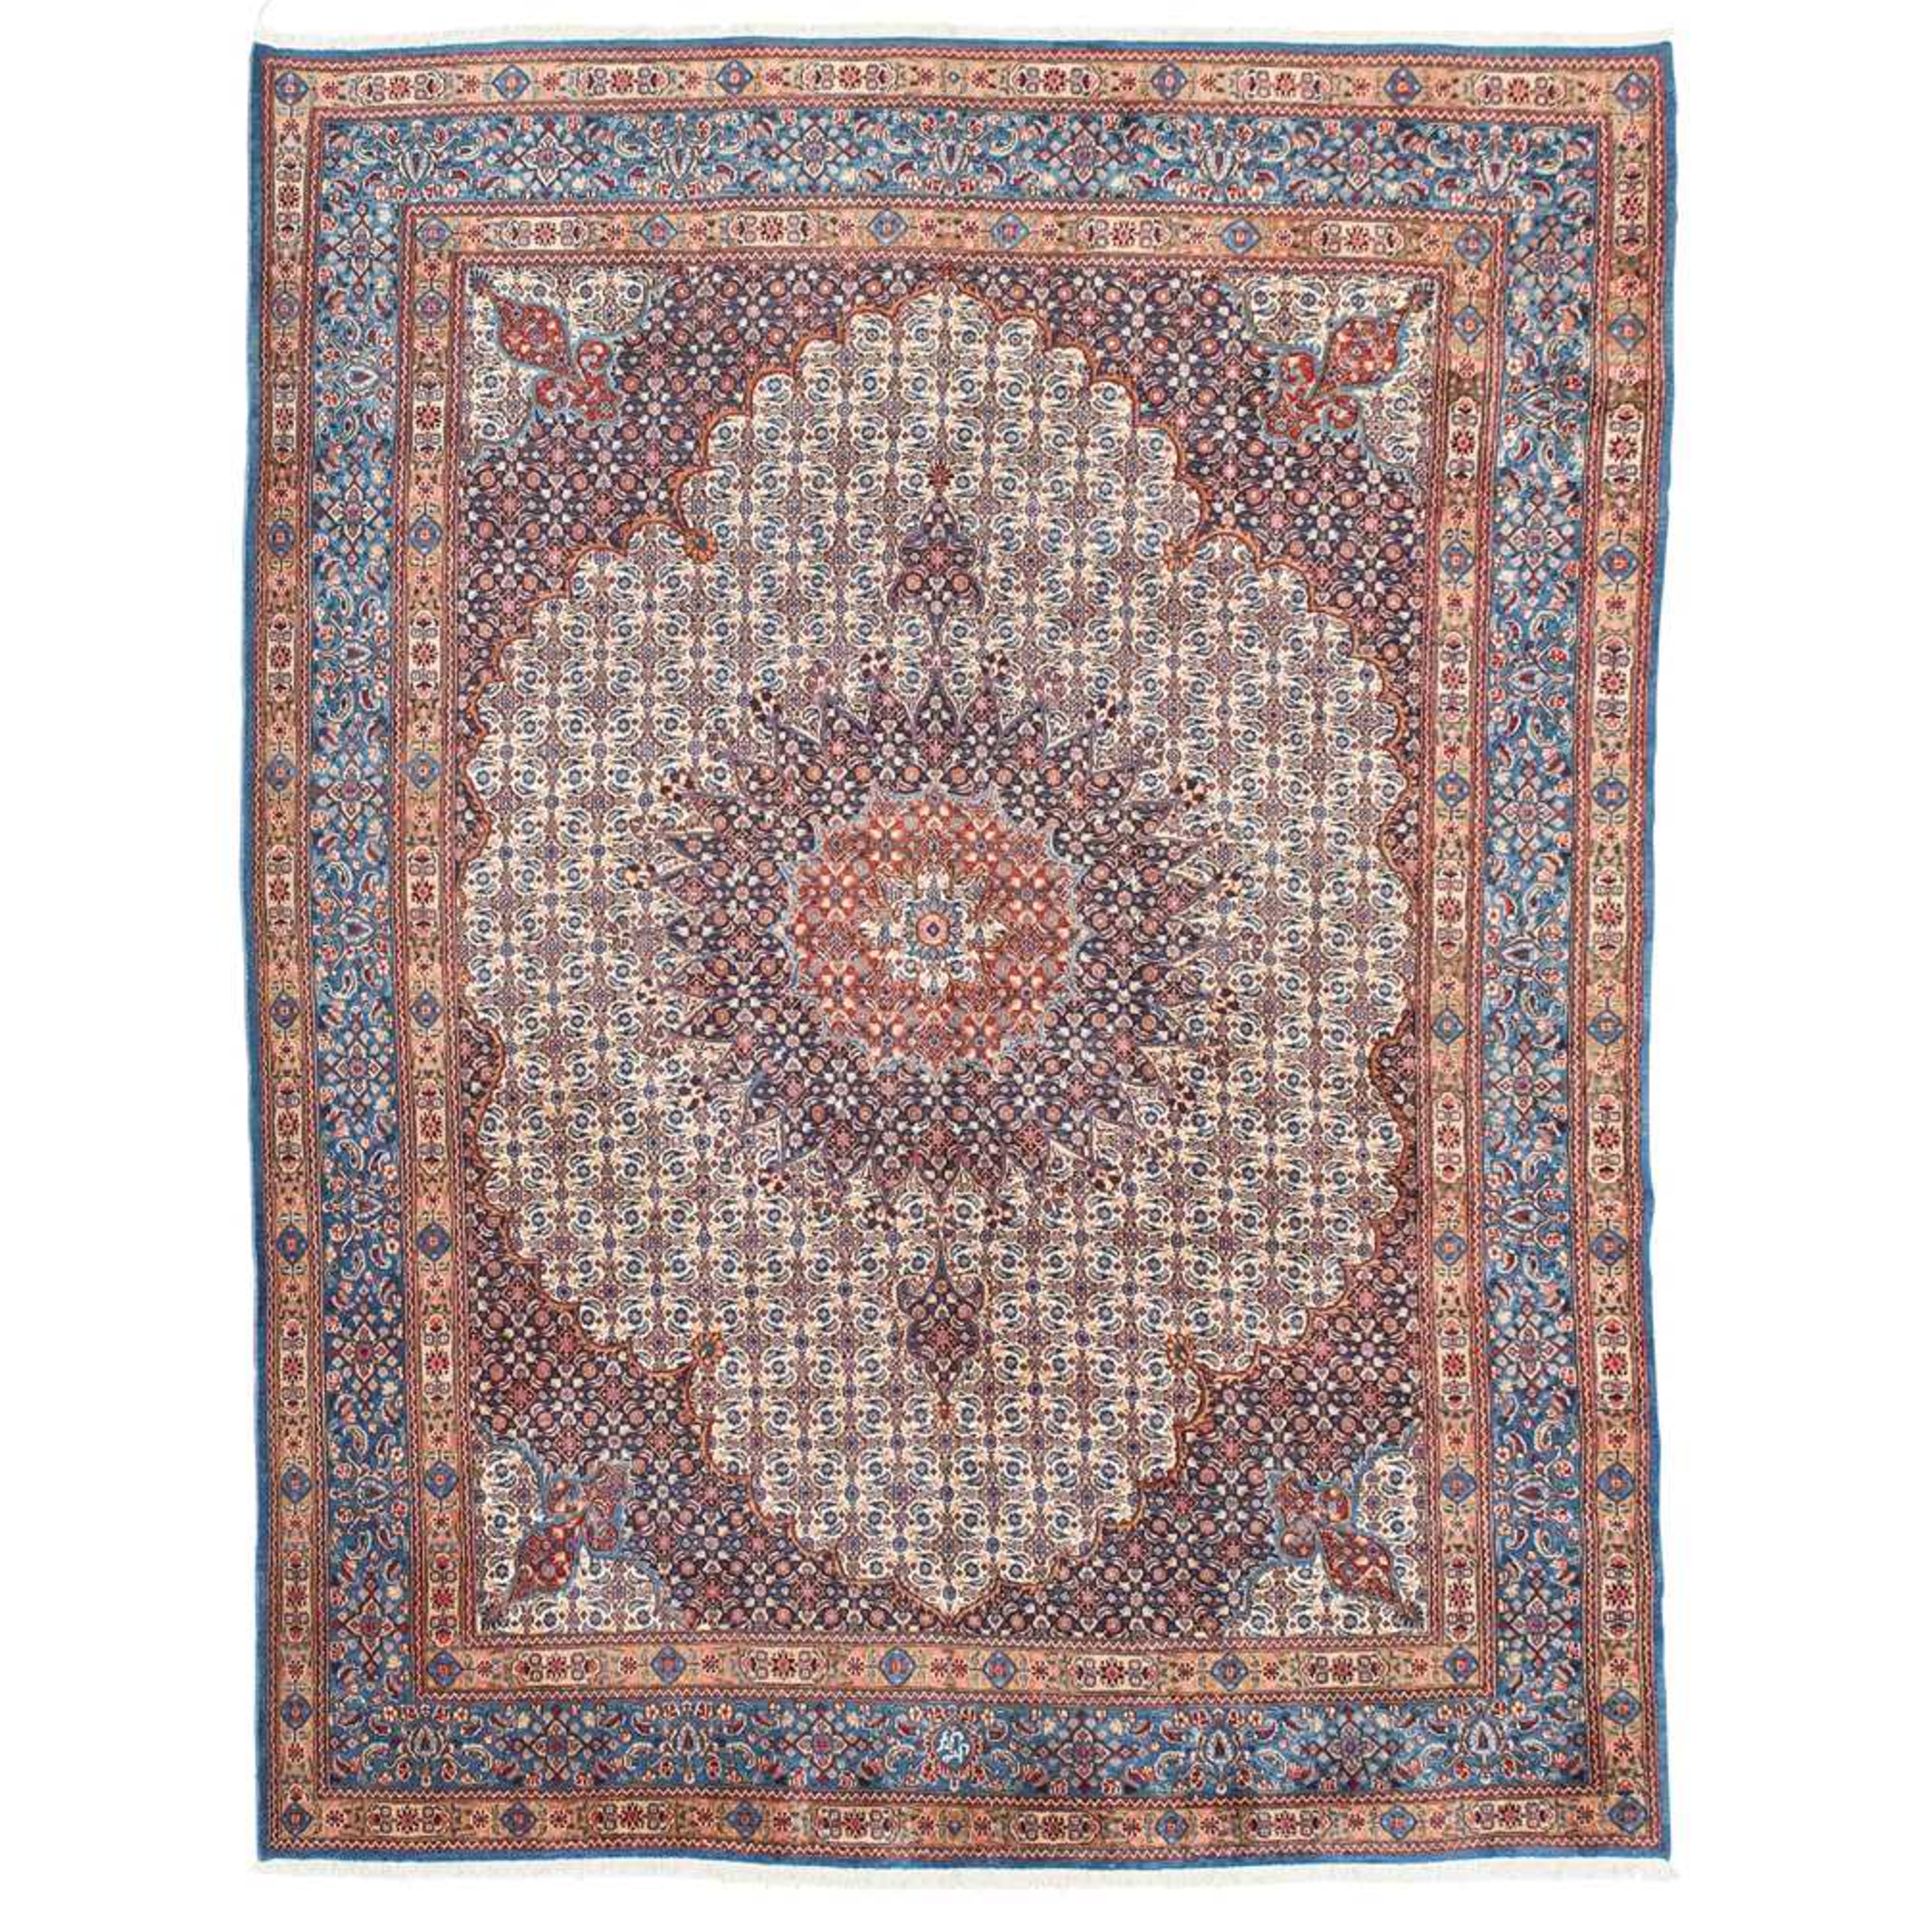 KHORASSAN CARPET EAST PERSIA, LATE 20TH CENTURY - Image 2 of 2